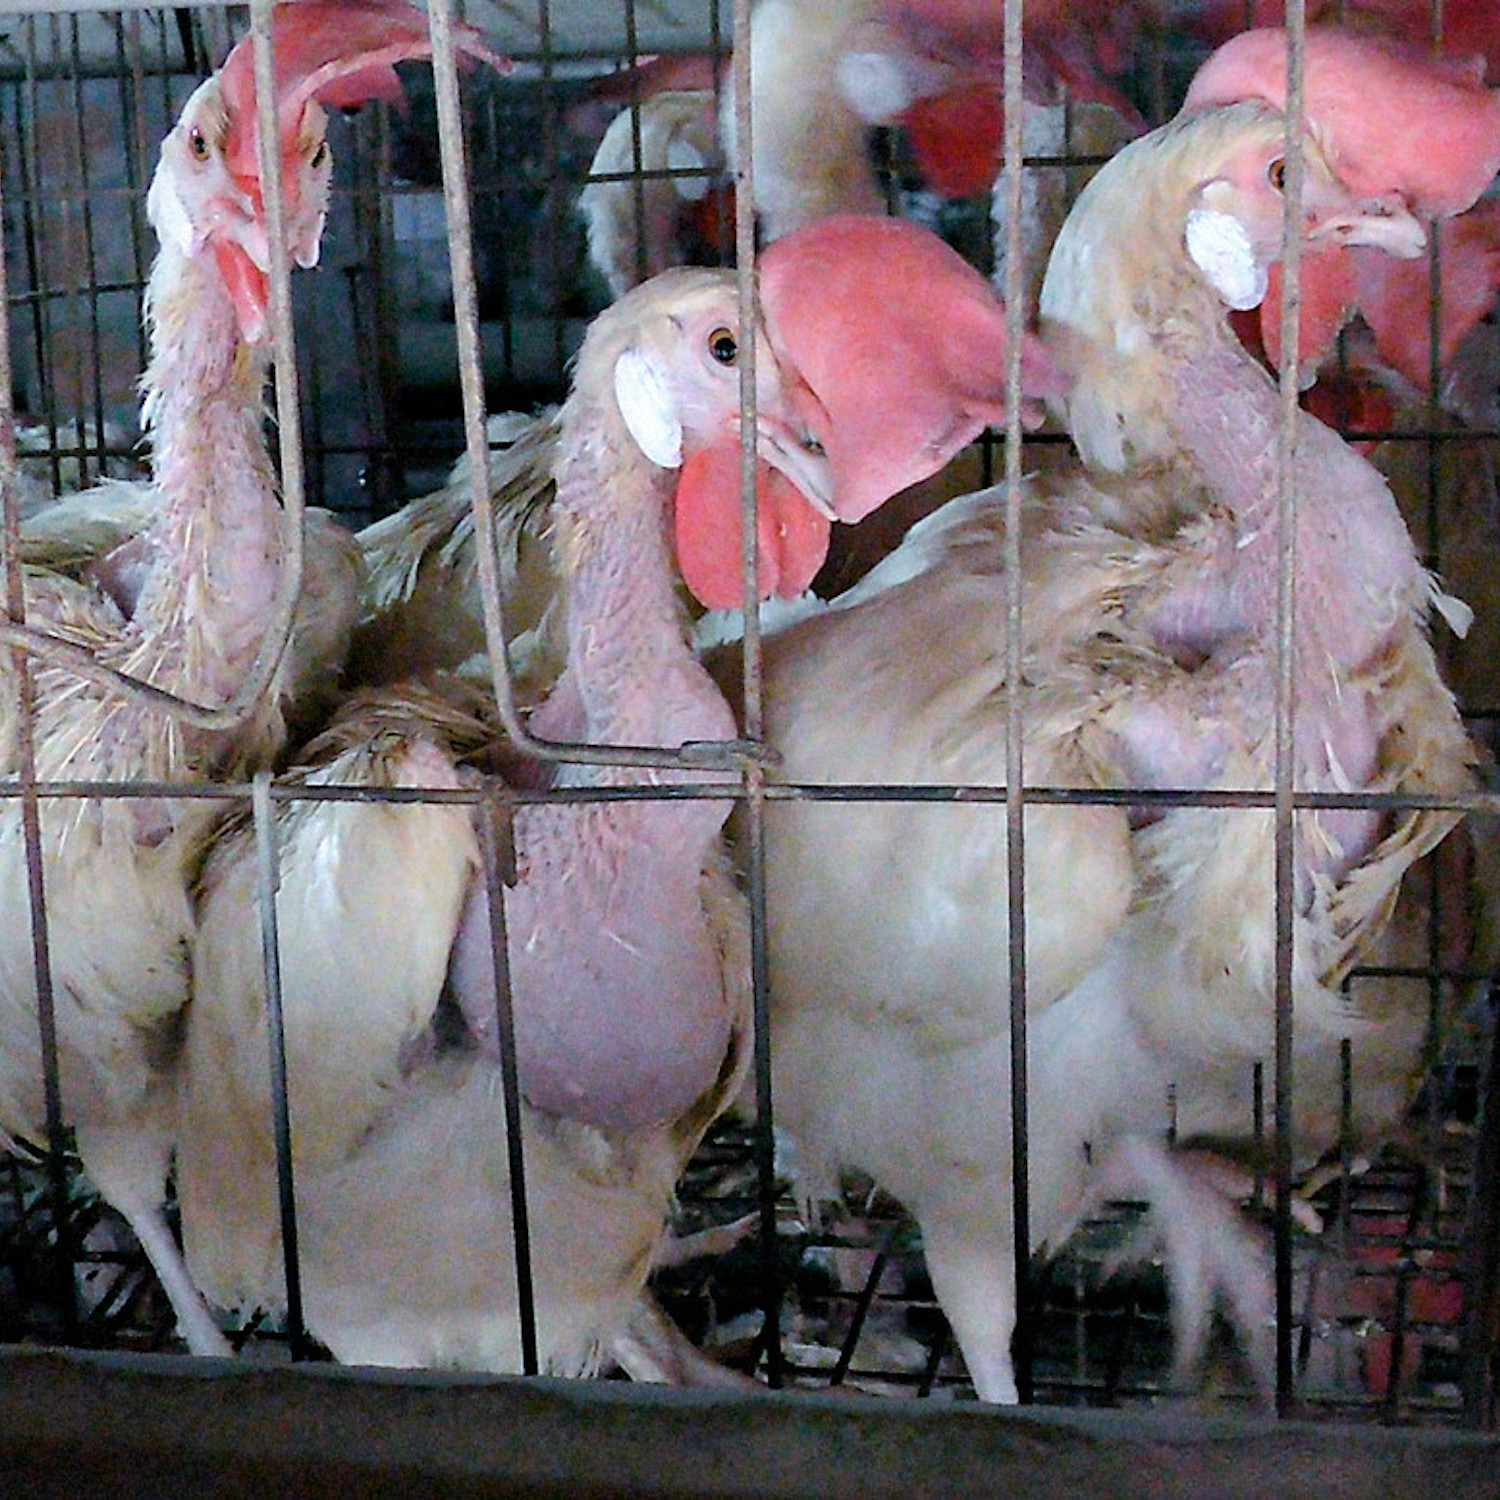 The Open Wing Alliance Calls on Viking Cruises to Finally Announce a Ban on Cages for Hens